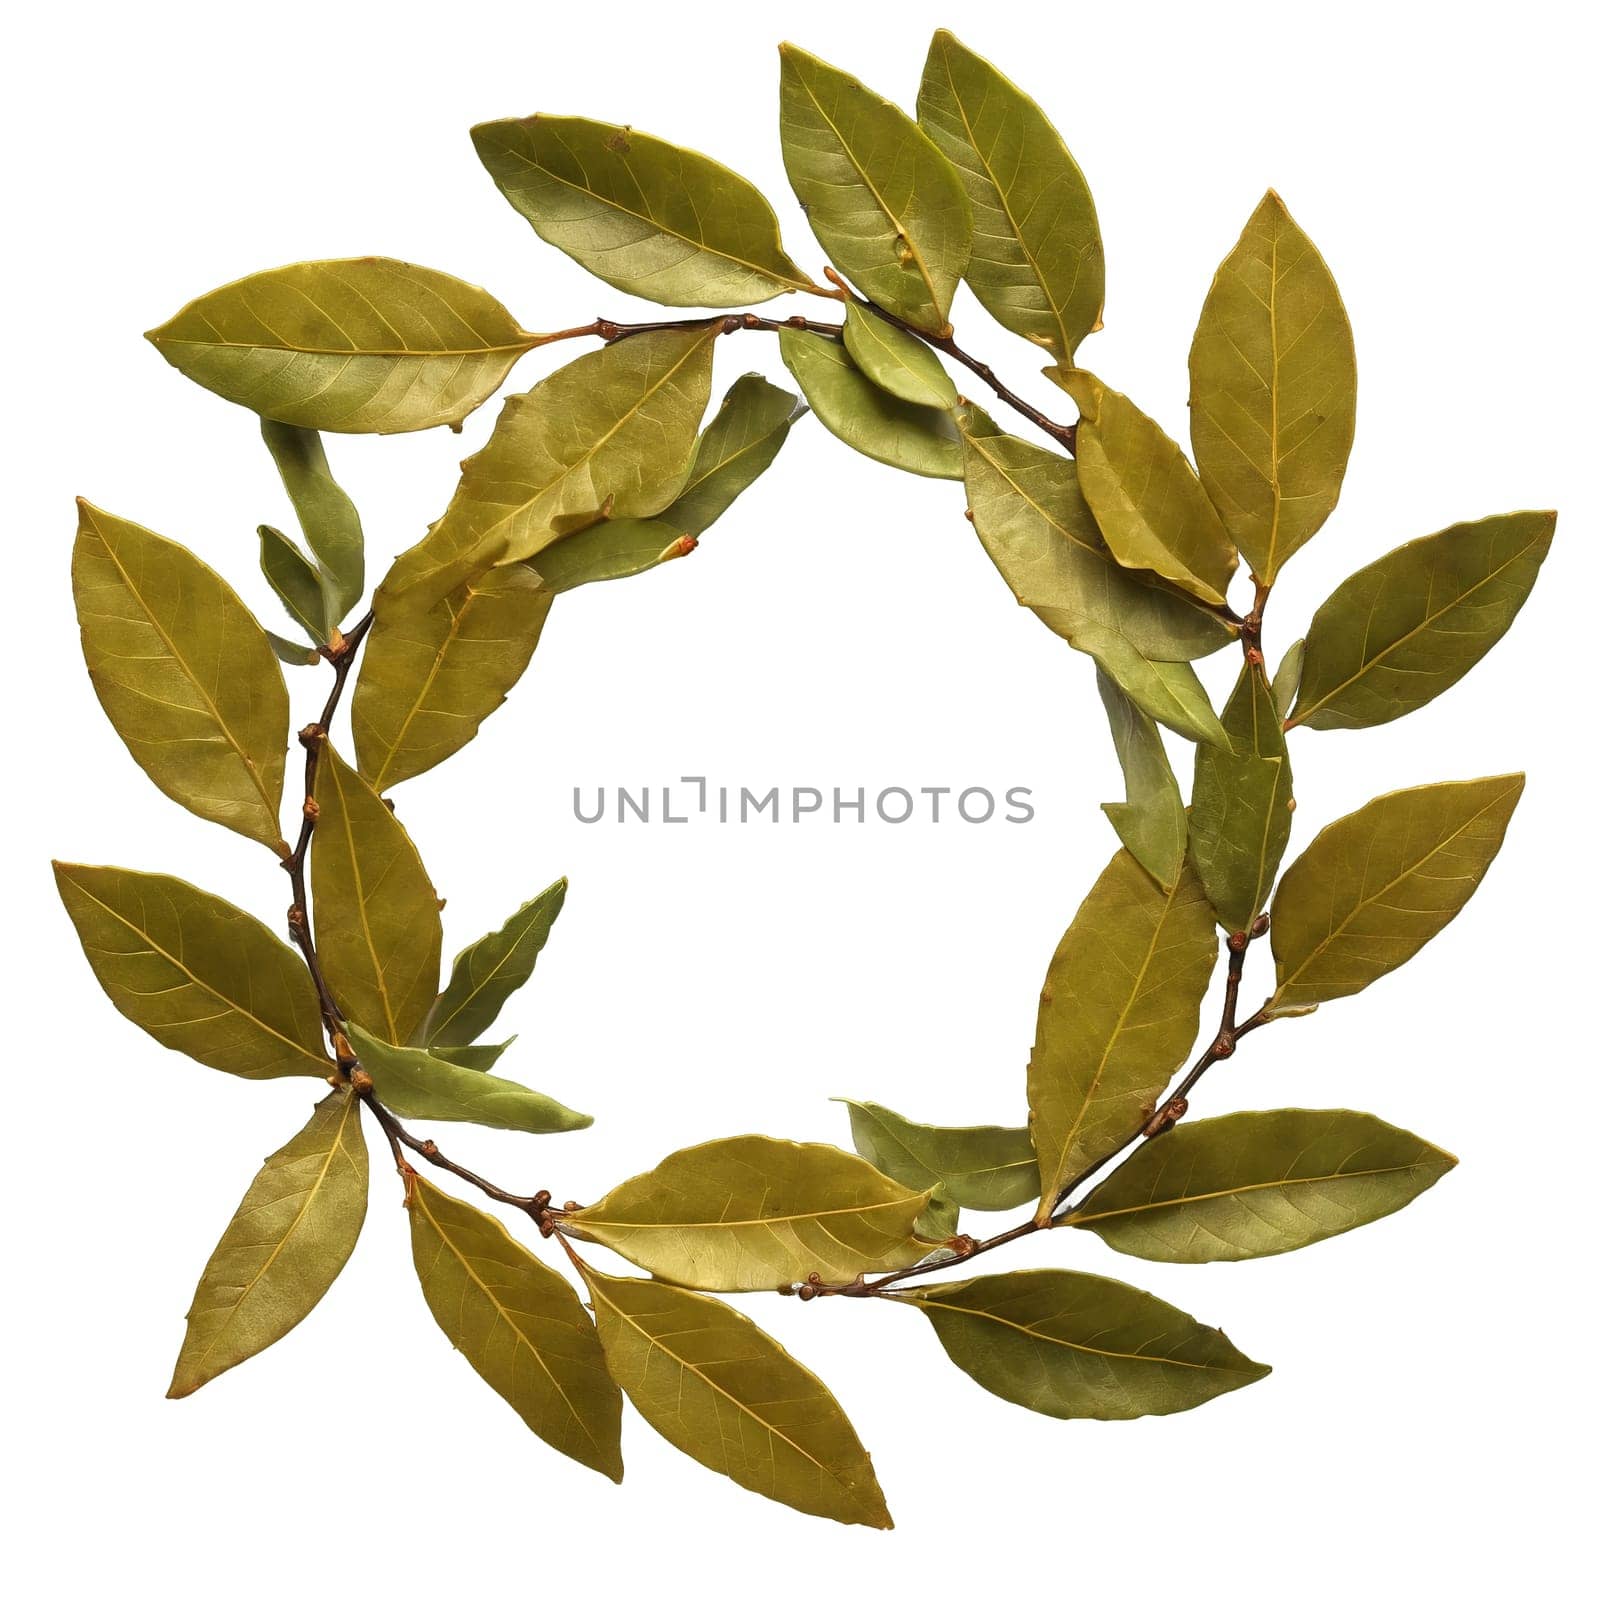 Bay Leaves fresh bay leaves arranged in a laurel wreath shape with some leaves falling by panophotograph